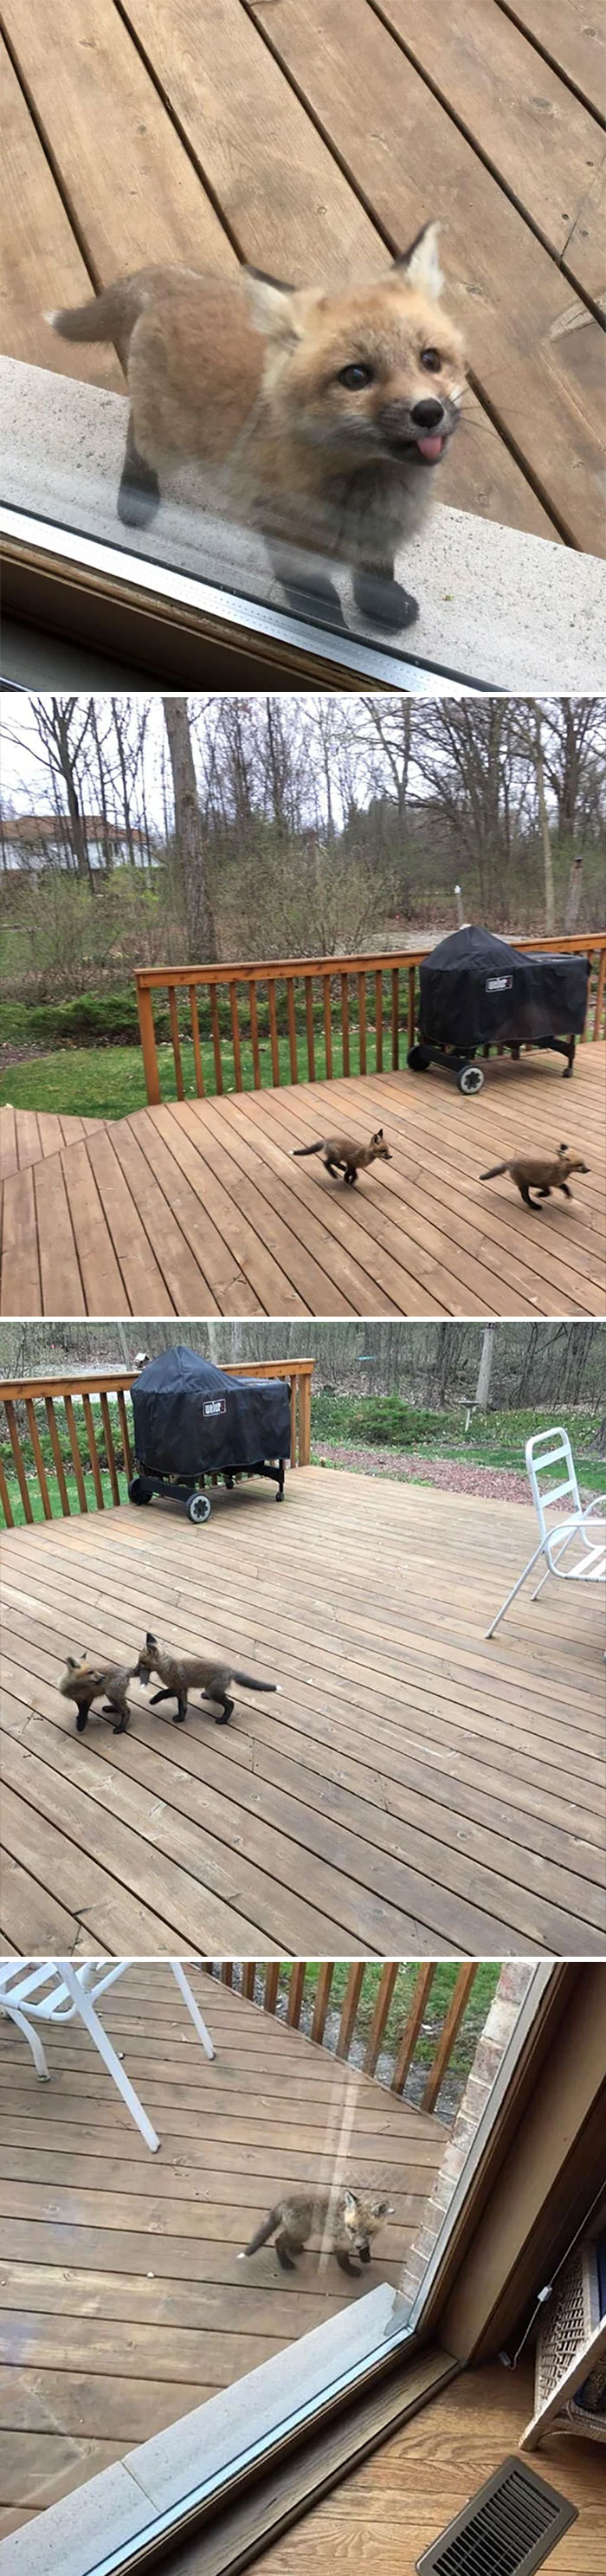 Baby Foxes Showed Up To Say Hi At My Grandmother’s House